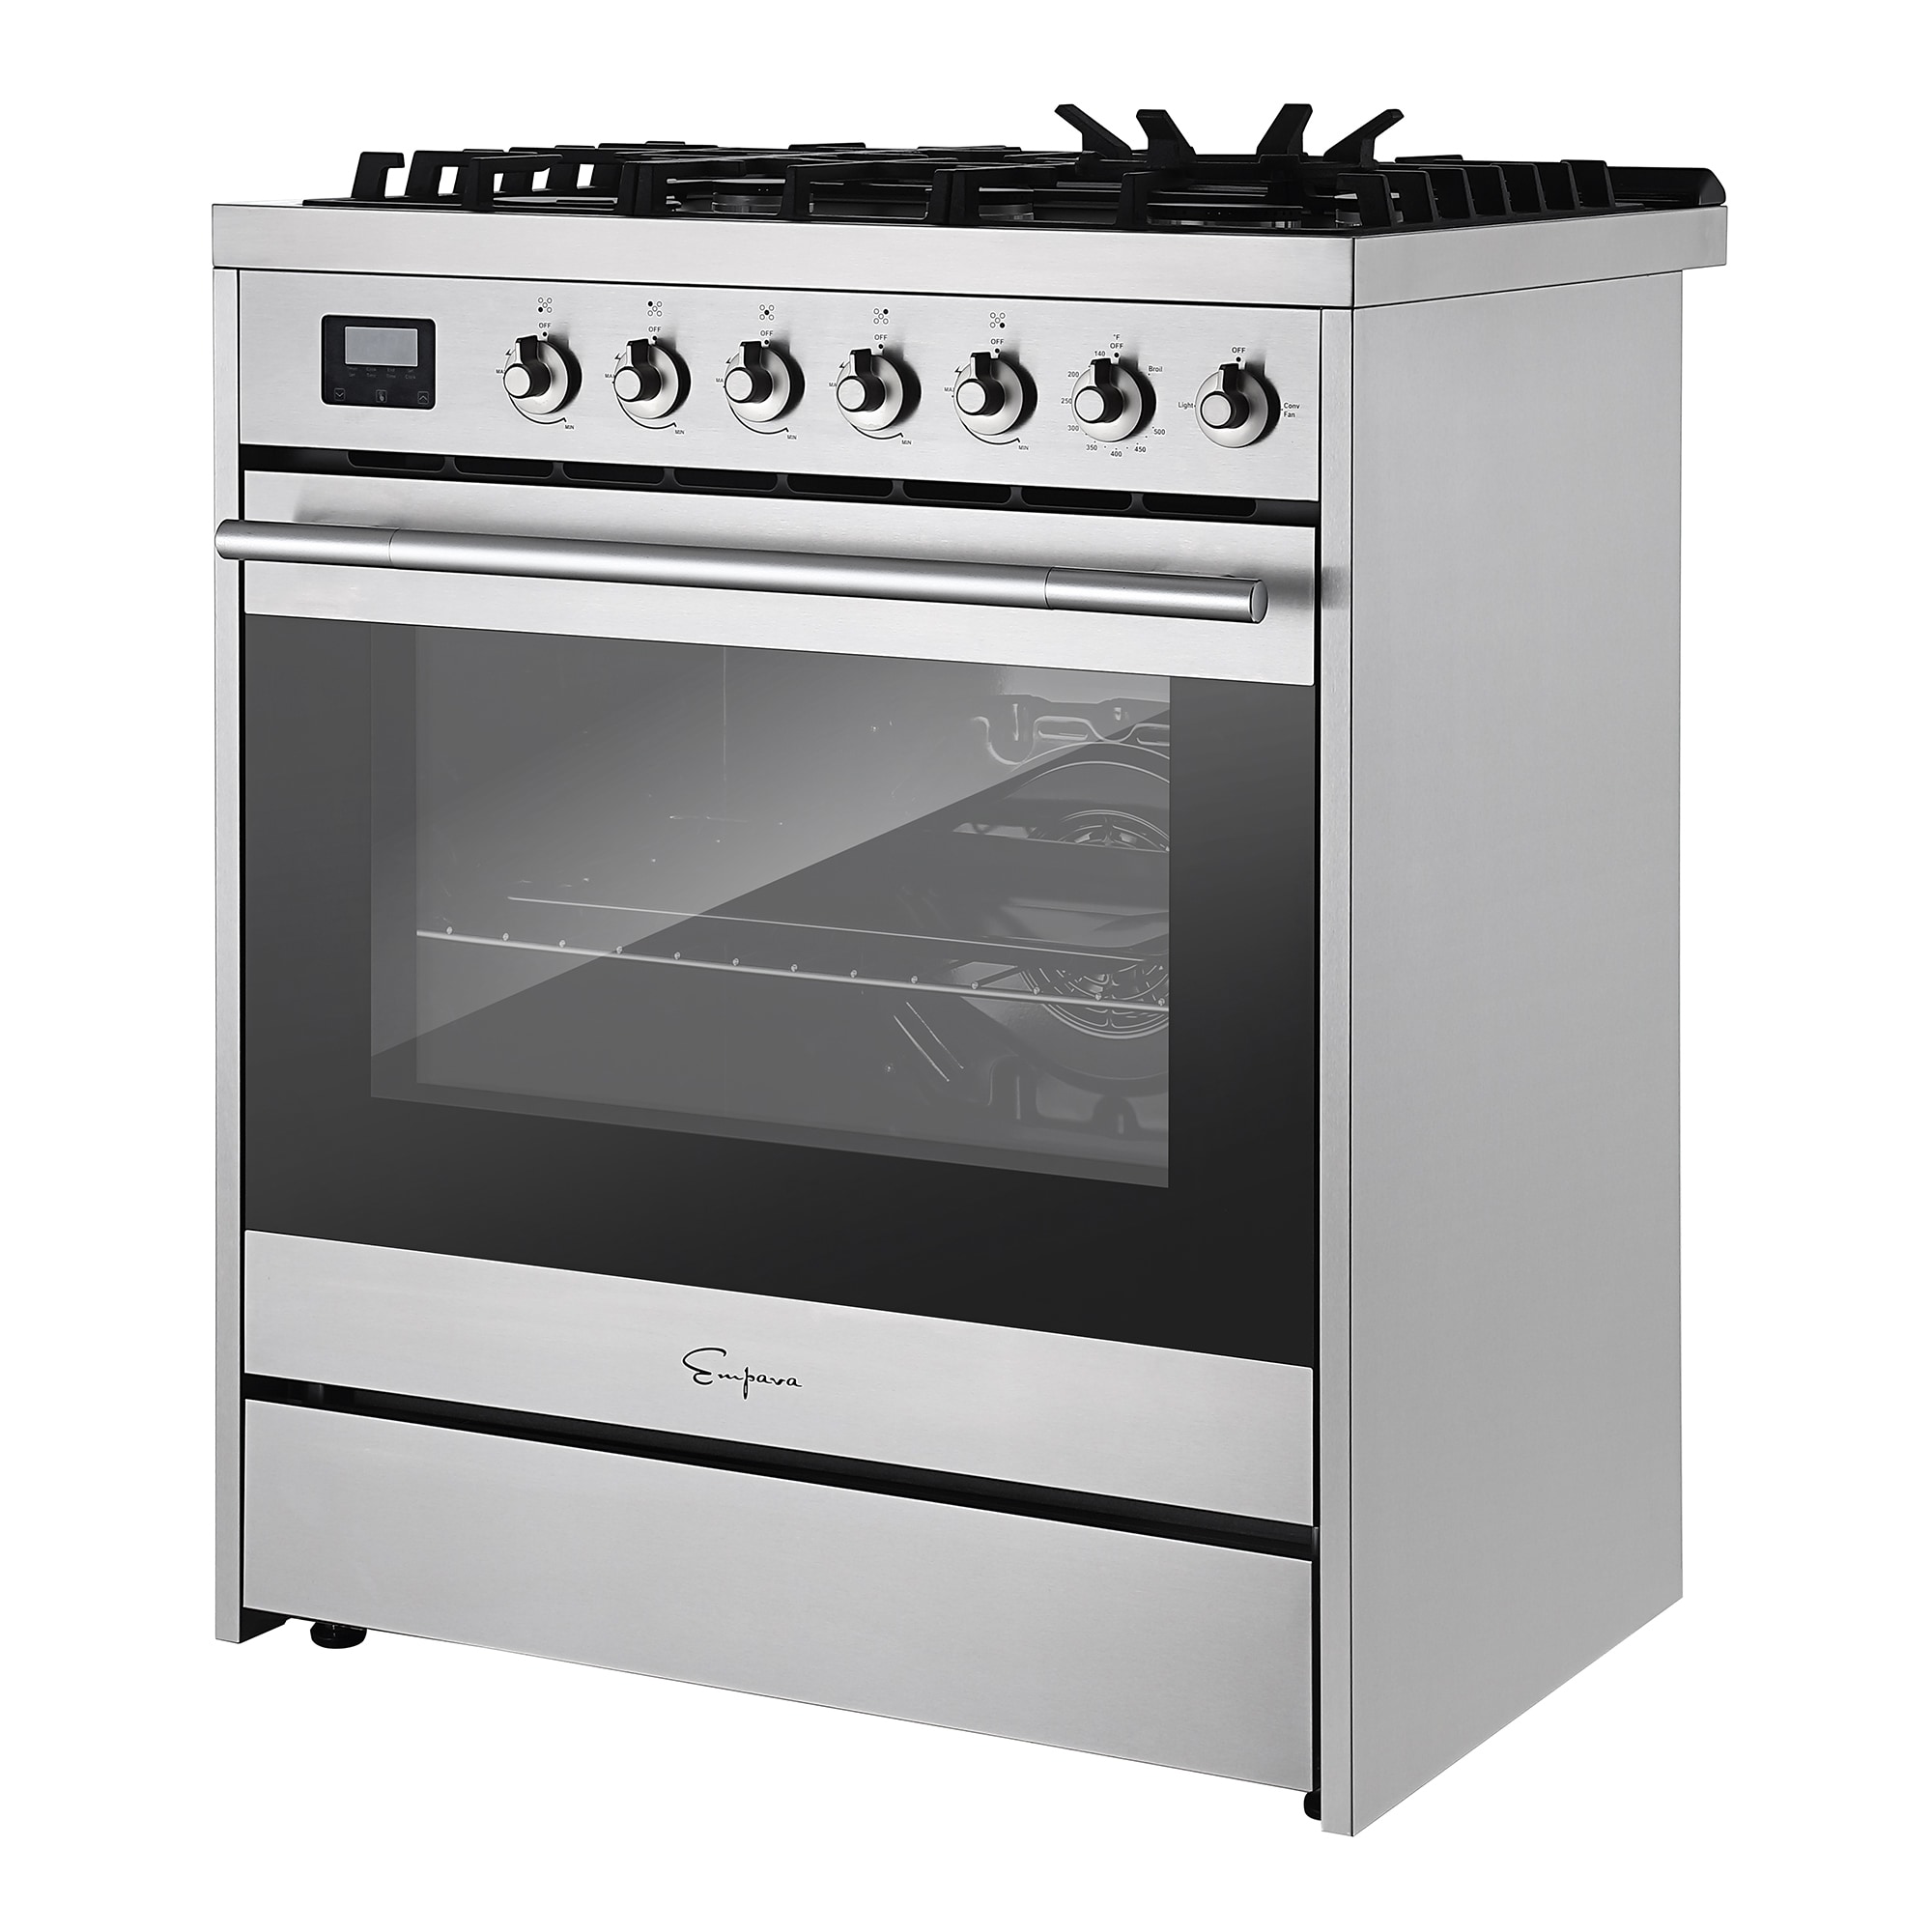 Gasland Chef Wall Oven 30 inch 5.0 CU.FT Digital Display Touch Control Stainless Steel Electric Oven with Temperature Probe, CSA Certified